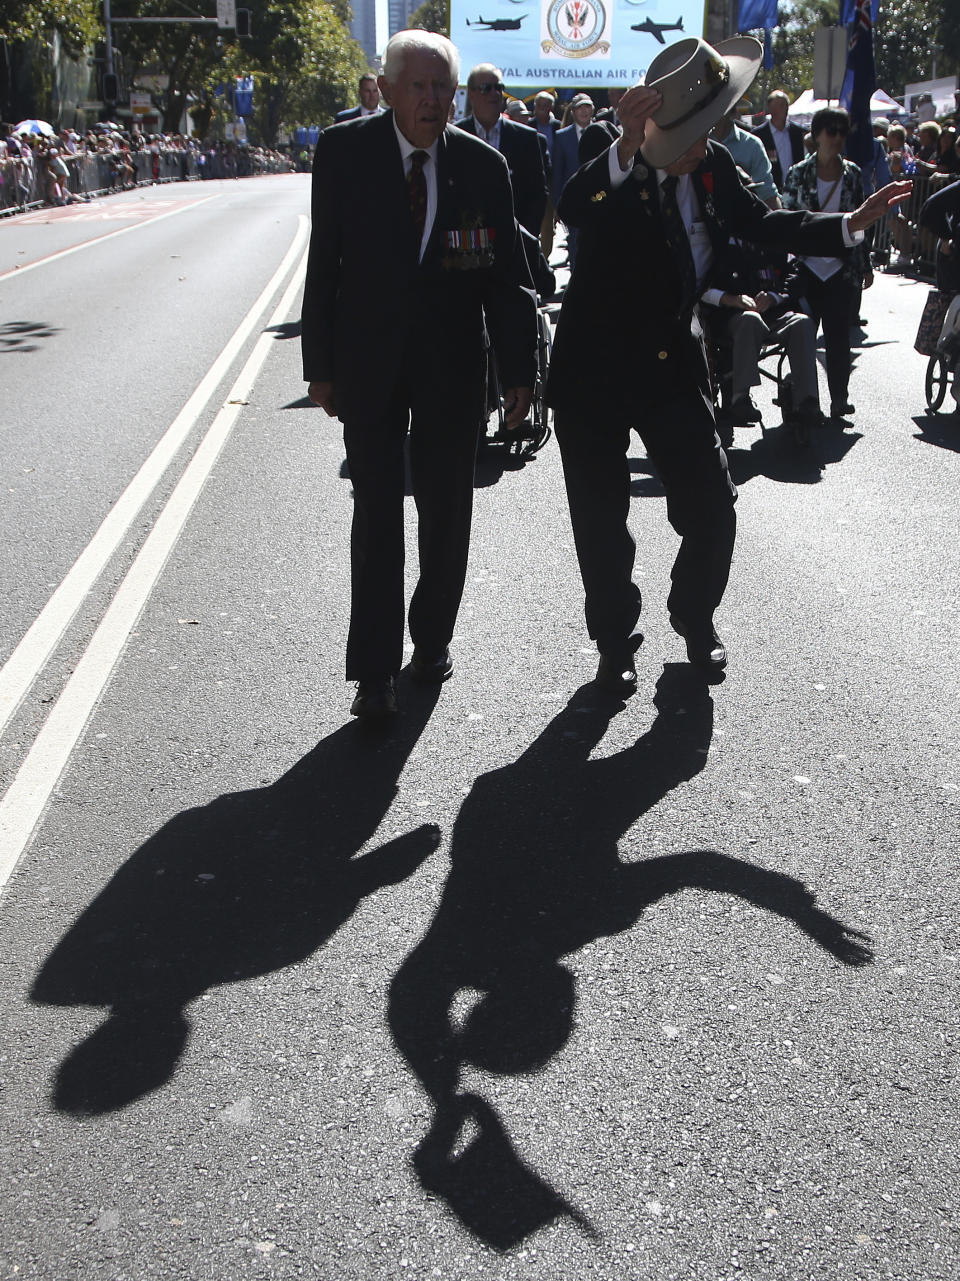 The shadow of an Australian veteran, right, is cast on the ground as he waves his hat during a march celebrating ANZAC Day, a national day of remembrance in Australia and New Zealand that commemorates those that served and died in all wars, conflicts, and while peacekeeping, in Sydney, Australia, Thursday, April 25, 2019. (AP Photo/Rick Rycroft)